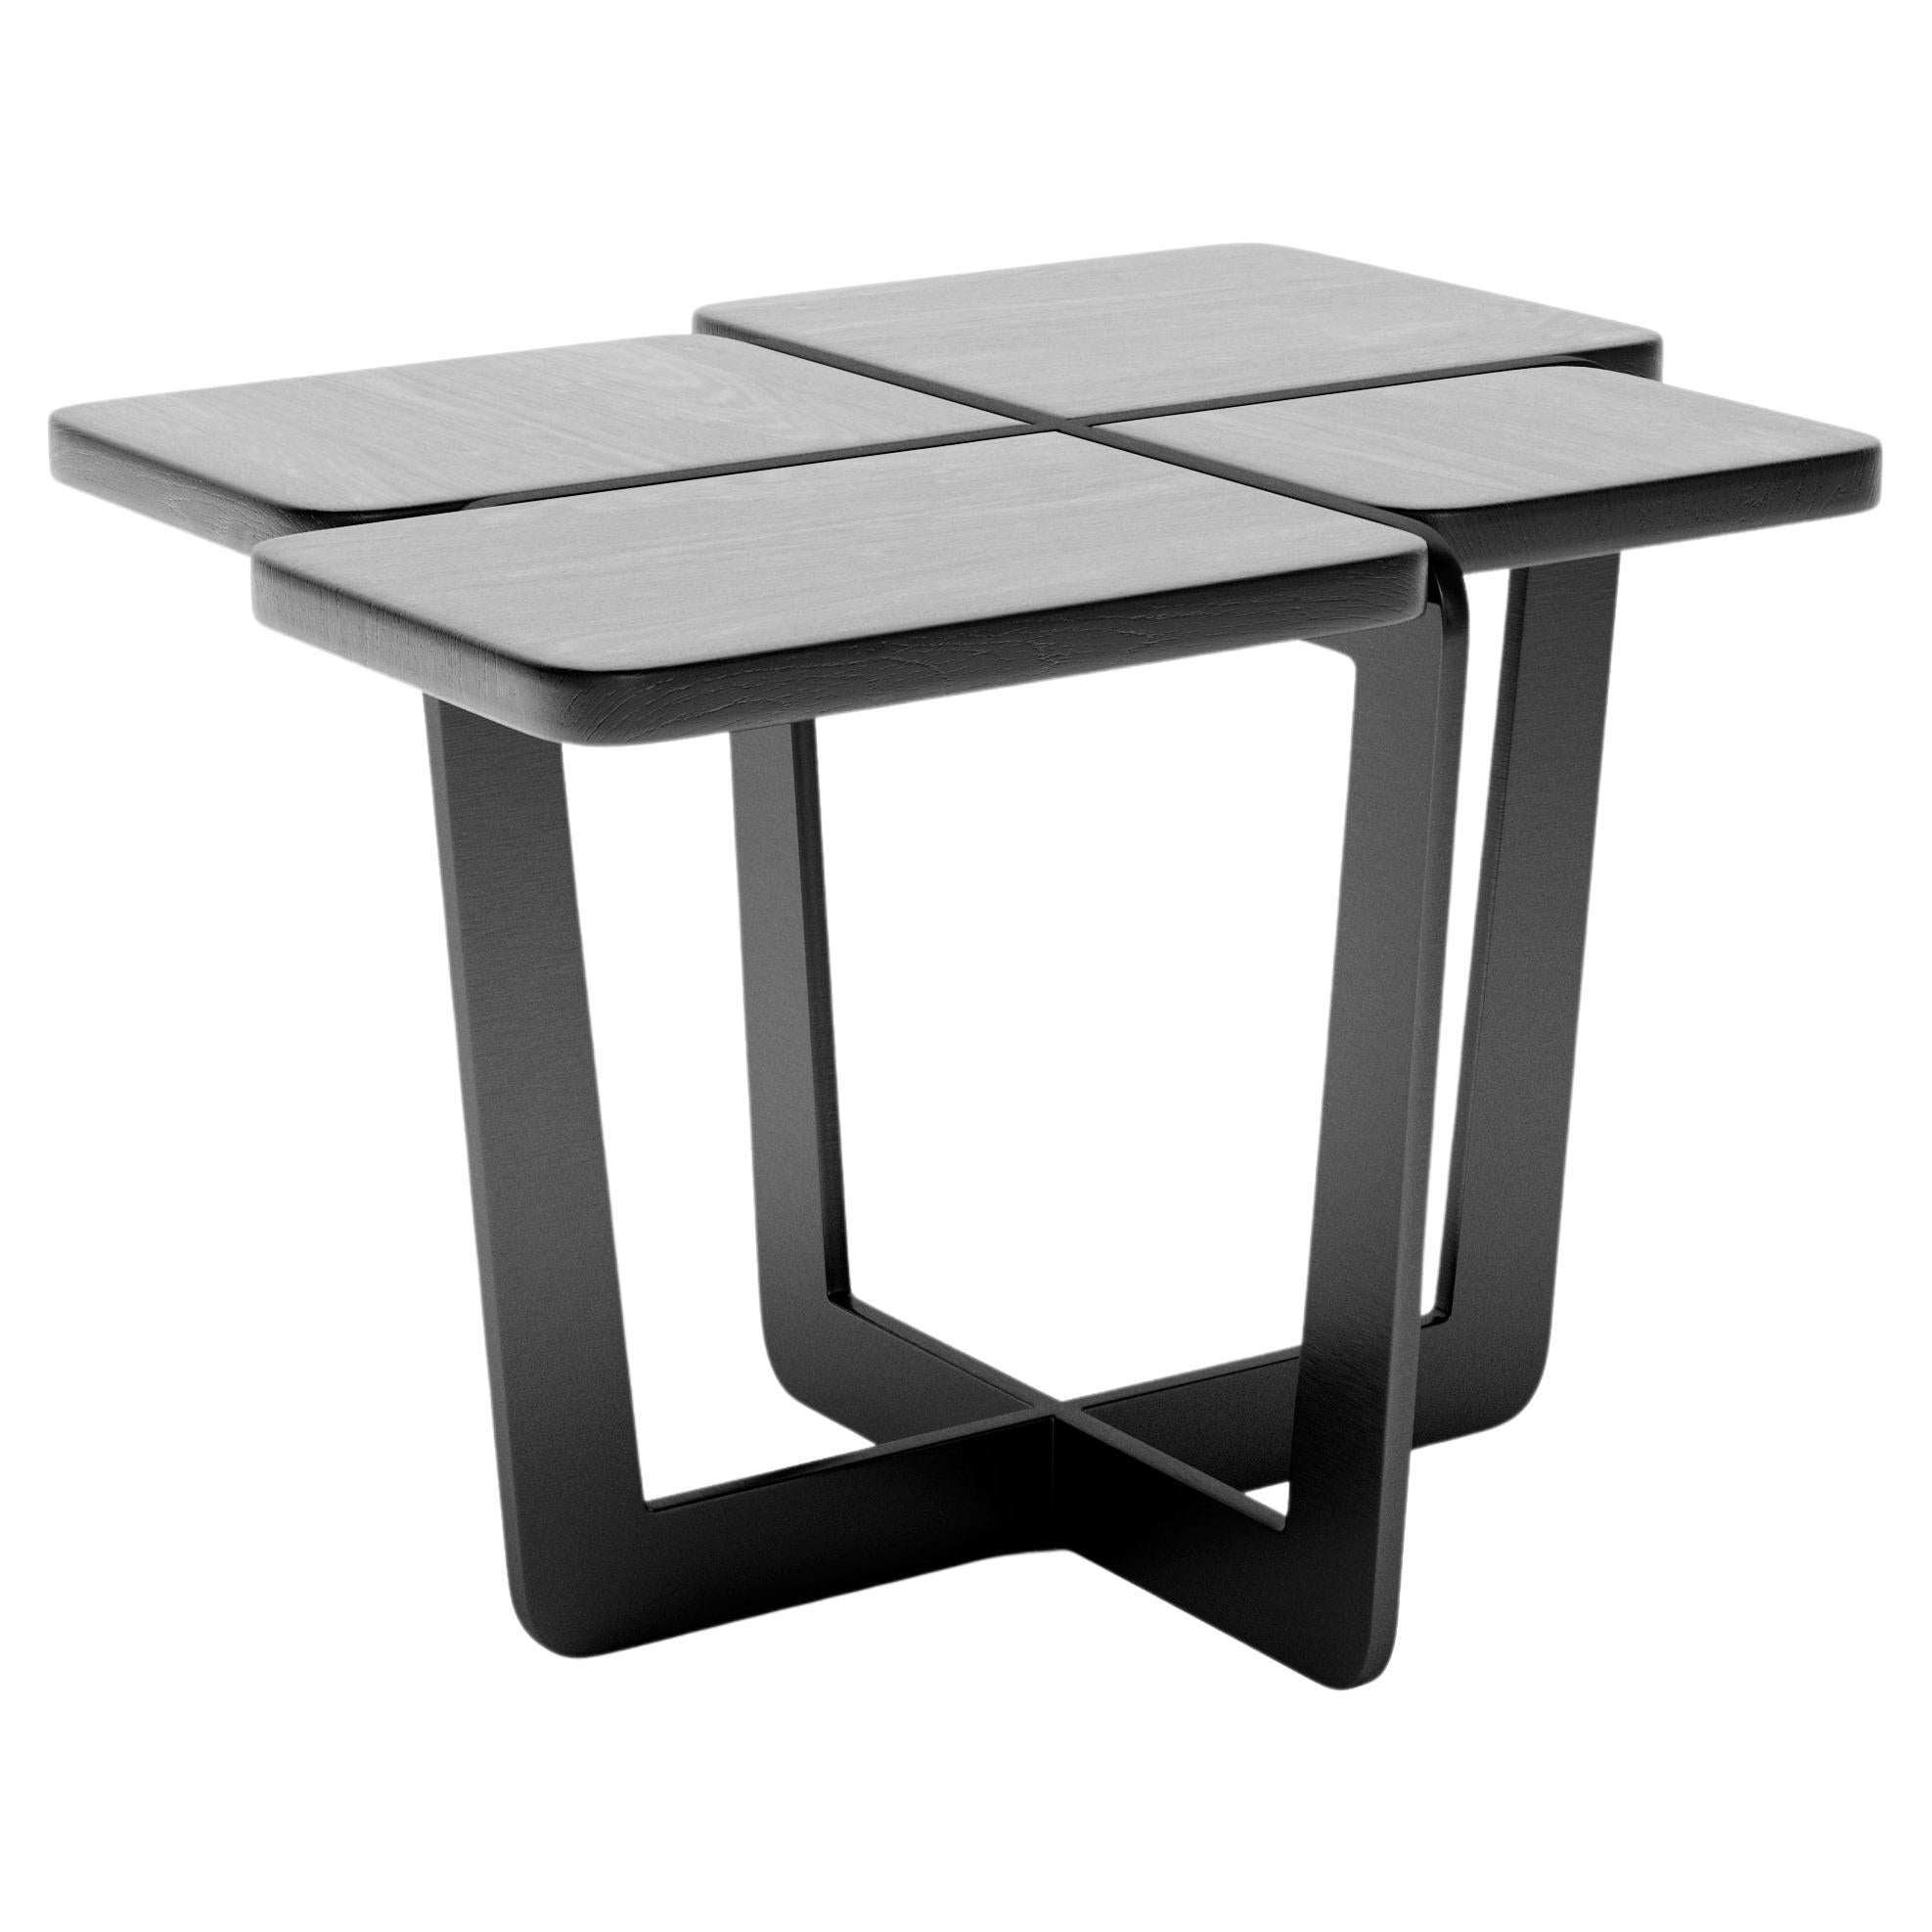 Low Coffee Table Gir A2 Made of Steel and Solid Wood For Sale